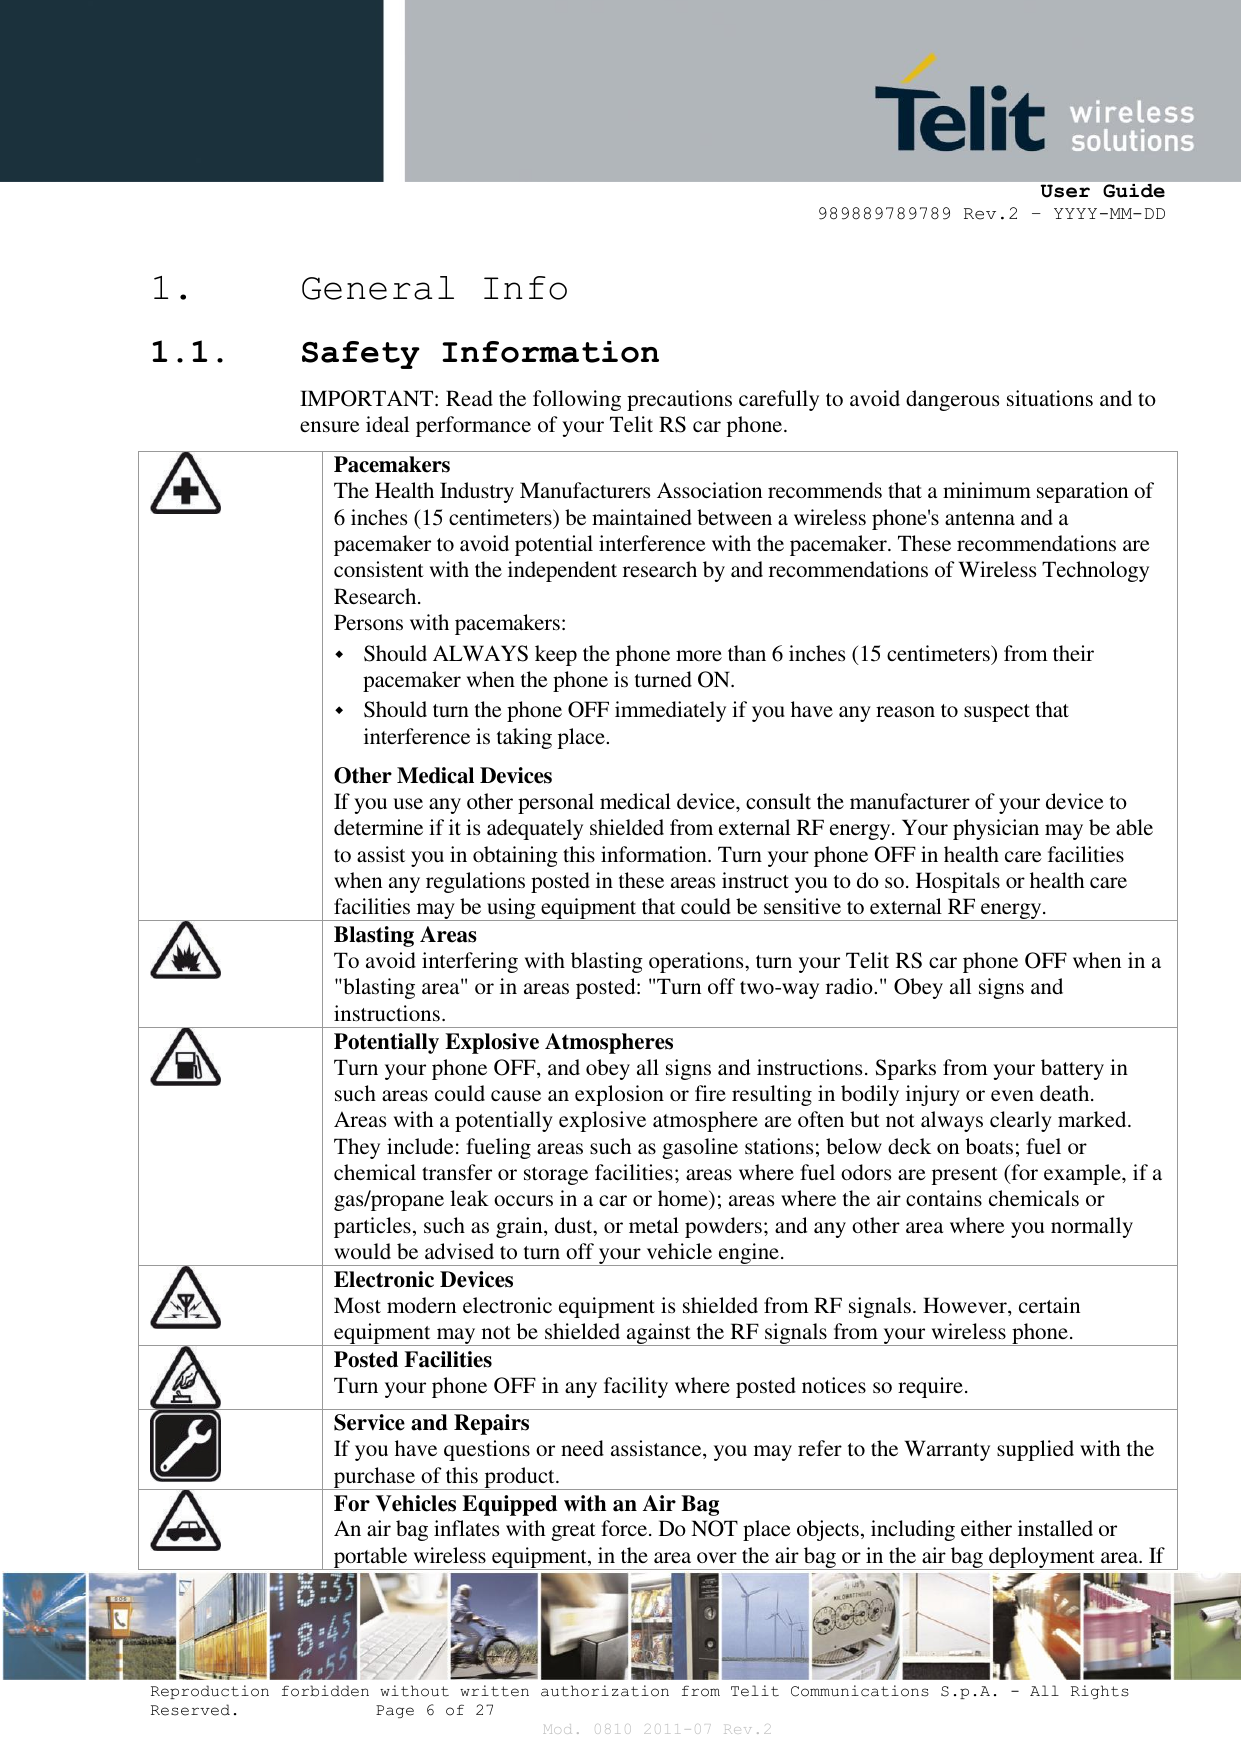      User Guide 989889789789 Rev.2 – YYYY-MM-DD  Reproduction forbidden without written authorization from Telit Communications S.p.A. - All Rights Reserved.    Page 6 of 27 Mod. 0810 2011-07 Rev.2 1. General Info 1.1. Safety Information IMPORTANT: Read the following precautions carefully to avoid dangerous situations and to ensure ideal performance of your Telit RS car phone.  Pacemakers The Health Industry Manufacturers Association recommends that a minimum separation of 6 inches (15 centimeters) be maintained between a wireless phone&apos;s antenna and a pacemaker to avoid potential interference with the pacemaker. These recommendations are consistent with the independent research by and recommendations of Wireless Technology Research. Persons with pacemakers:  Should ALWAYS keep the phone more than 6 inches (15 centimeters) from their pacemaker when the phone is turned ON.  Should turn the phone OFF immediately if you have any reason to suspect that interference is taking place. Other Medical Devices If you use any other personal medical device, consult the manufacturer of your device to determine if it is adequately shielded from external RF energy. Your physician may be able to assist you in obtaining this information. Turn your phone OFF in health care facilities when any regulations posted in these areas instruct you to do so. Hospitals or health care facilities may be using equipment that could be sensitive to external RF energy.  Blasting Areas To avoid interfering with blasting operations, turn your Telit RS car phone OFF when in a &quot;blasting area&quot; or in areas posted: &quot;Turn off two-way radio.&quot; Obey all signs and instructions.  Potentially Explosive Atmospheres Turn your phone OFF, and obey all signs and instructions. Sparks from your battery in such areas could cause an explosion or fire resulting in bodily injury or even death. Areas with a potentially explosive atmosphere are often but not always clearly marked. They include: fueling areas such as gasoline stations; below deck on boats; fuel or chemical transfer or storage facilities; areas where fuel odors are present (for example, if a gas/propane leak occurs in a car or home); areas where the air contains chemicals or particles, such as grain, dust, or metal powders; and any other area where you normally would be advised to turn off your vehicle engine.  Electronic Devices Most modern electronic equipment is shielded from RF signals. However, certain equipment may not be shielded against the RF signals from your wireless phone.   Posted Facilities Turn your phone OFF in any facility where posted notices so require.  Service and Repairs If you have questions or need assistance, you may refer to the Warranty supplied with the purchase of this product.  For Vehicles Equipped with an Air Bag An air bag inflates with great force. Do NOT place objects, including either installed or portable wireless equipment, in the area over the air bag or in the air bag deployment area. If 